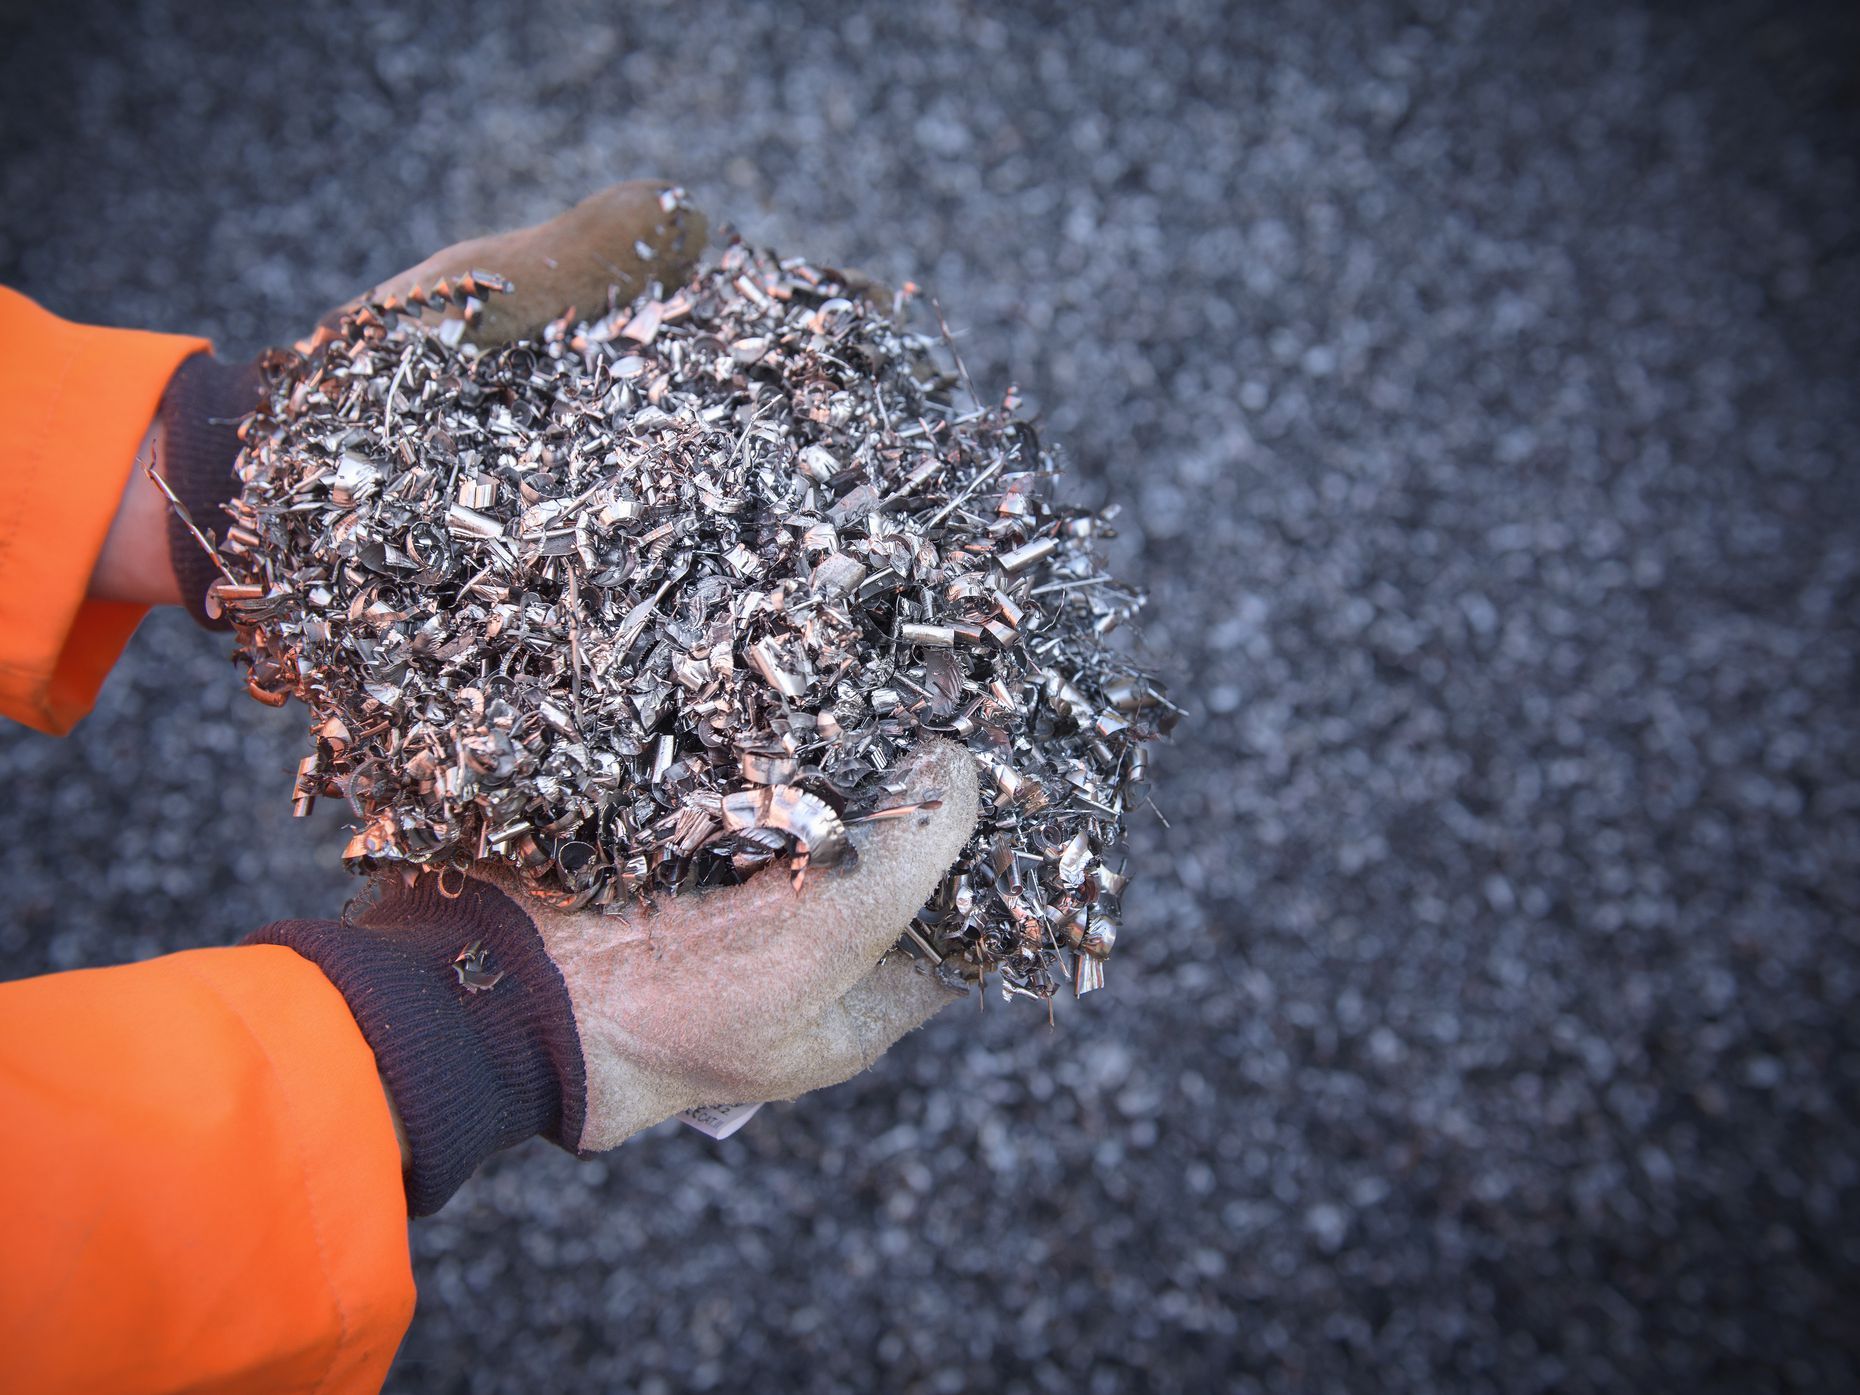 The different types of metal that can be recycled